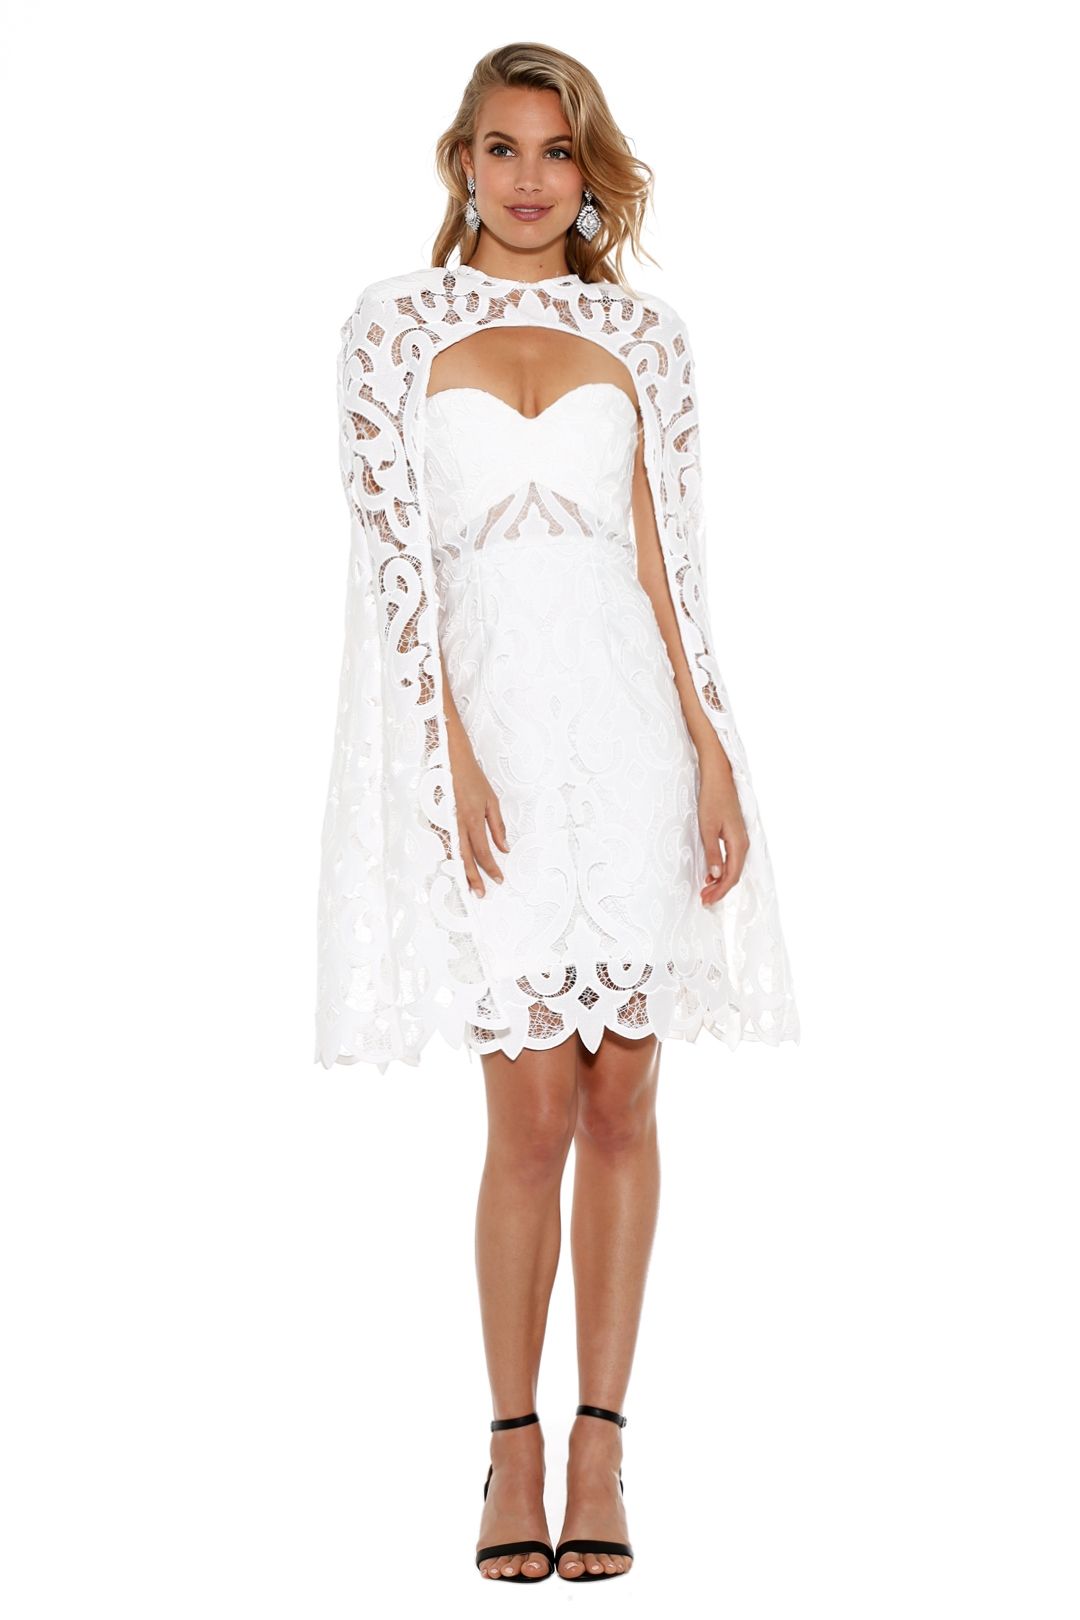 Thurley - Khalessi Cape Dress - White - Front